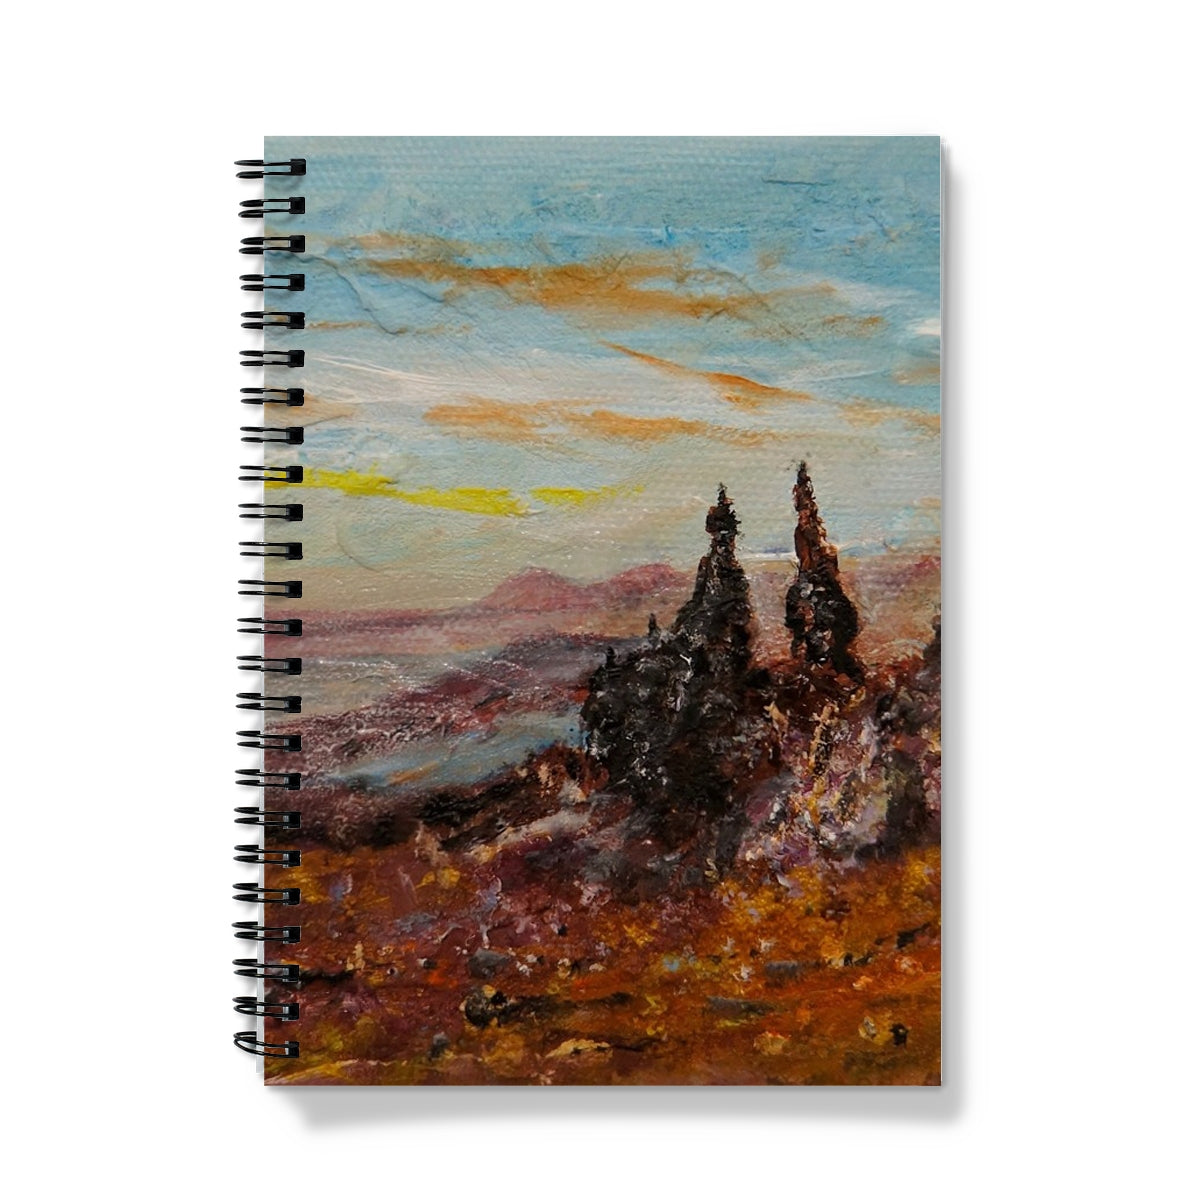 The Old Man Of Storr Skye Art Gifts Notebook-Journals & Notebooks-Skye Art Gallery-A5-Lined-Paintings, Prints, Homeware, Art Gifts From Scotland By Scottish Artist Kevin Hunter